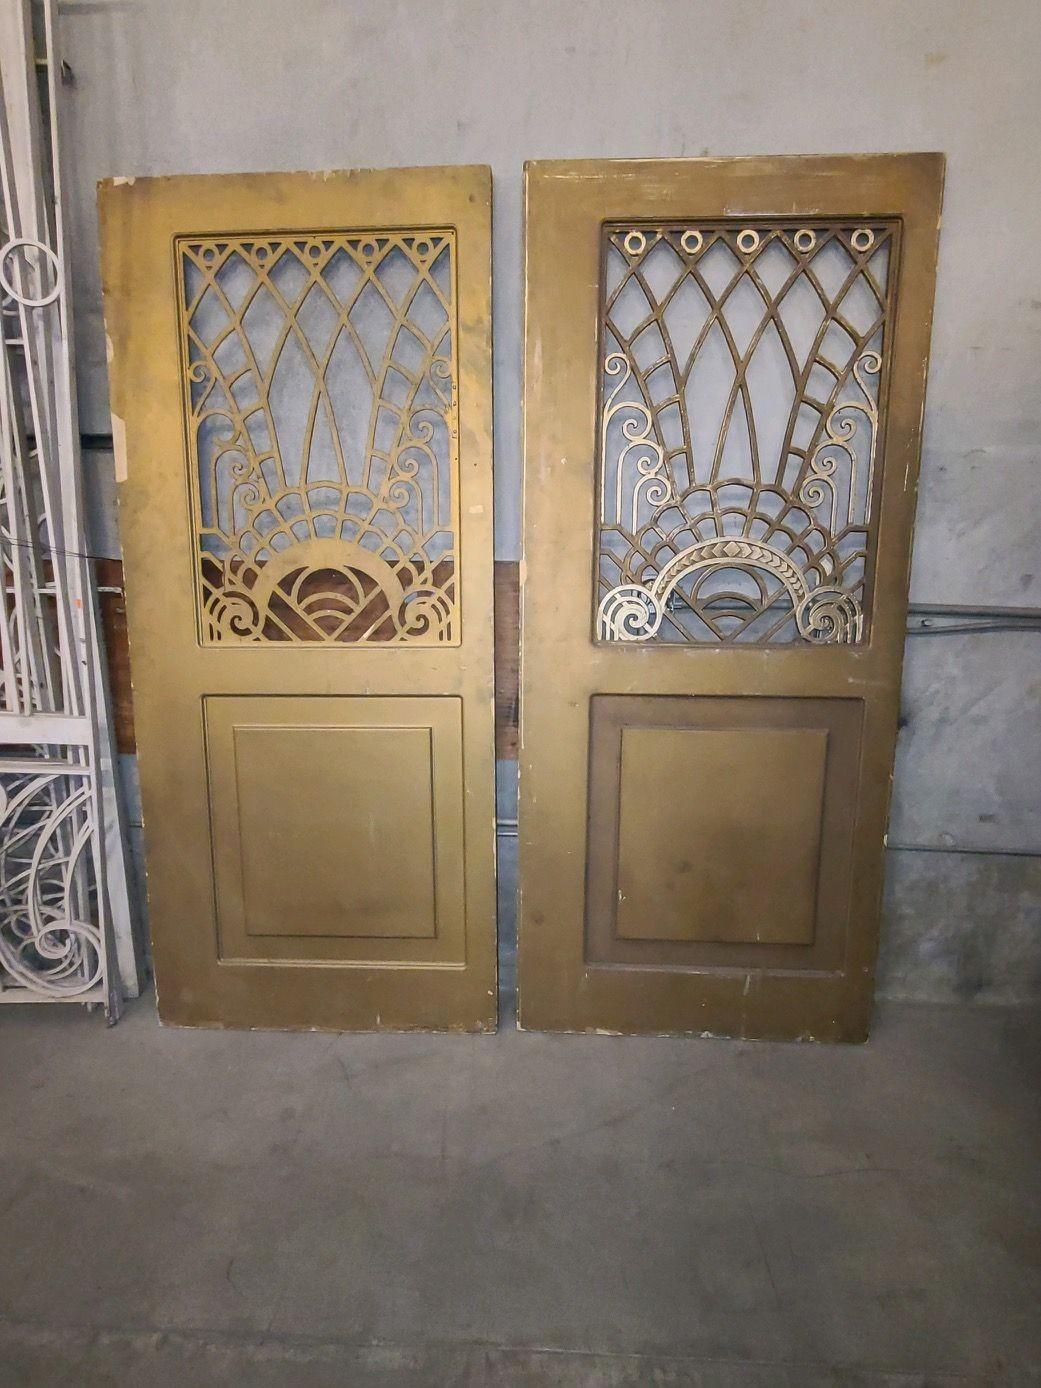 Large 8' multipaneled gold Painted interior double doors featuring multiple crown moldings with geometric Art Deco wrought iron panels along the top. Pulled from a 1920s hotel lobby in Los Angles during the 1970s

Individual Door: H 96